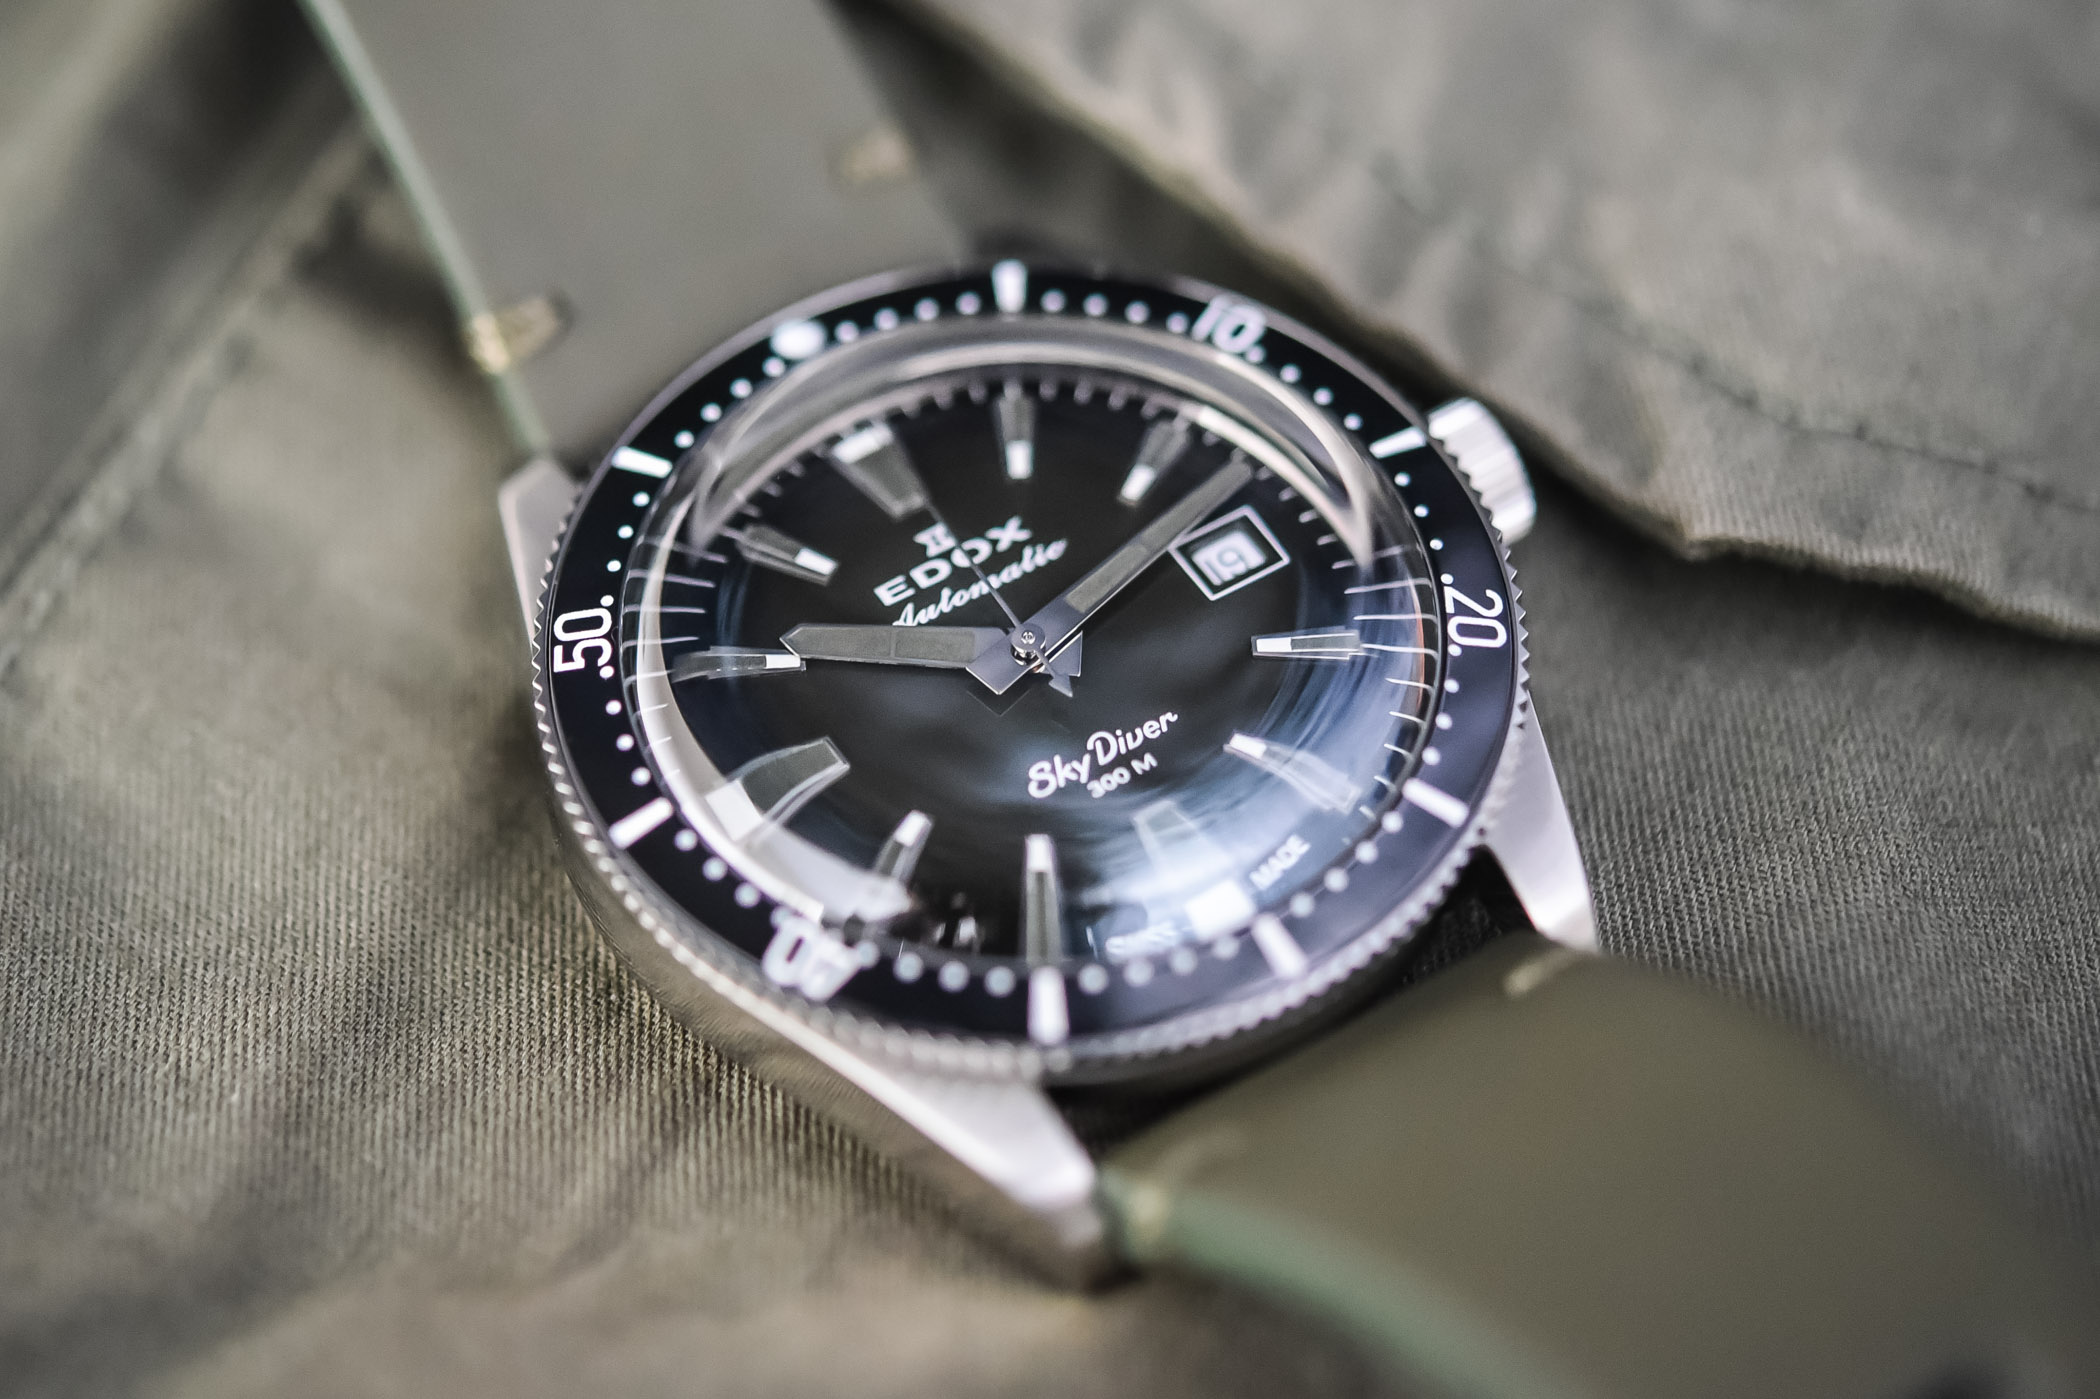 Edox SkyDiver Limited Edition 2021